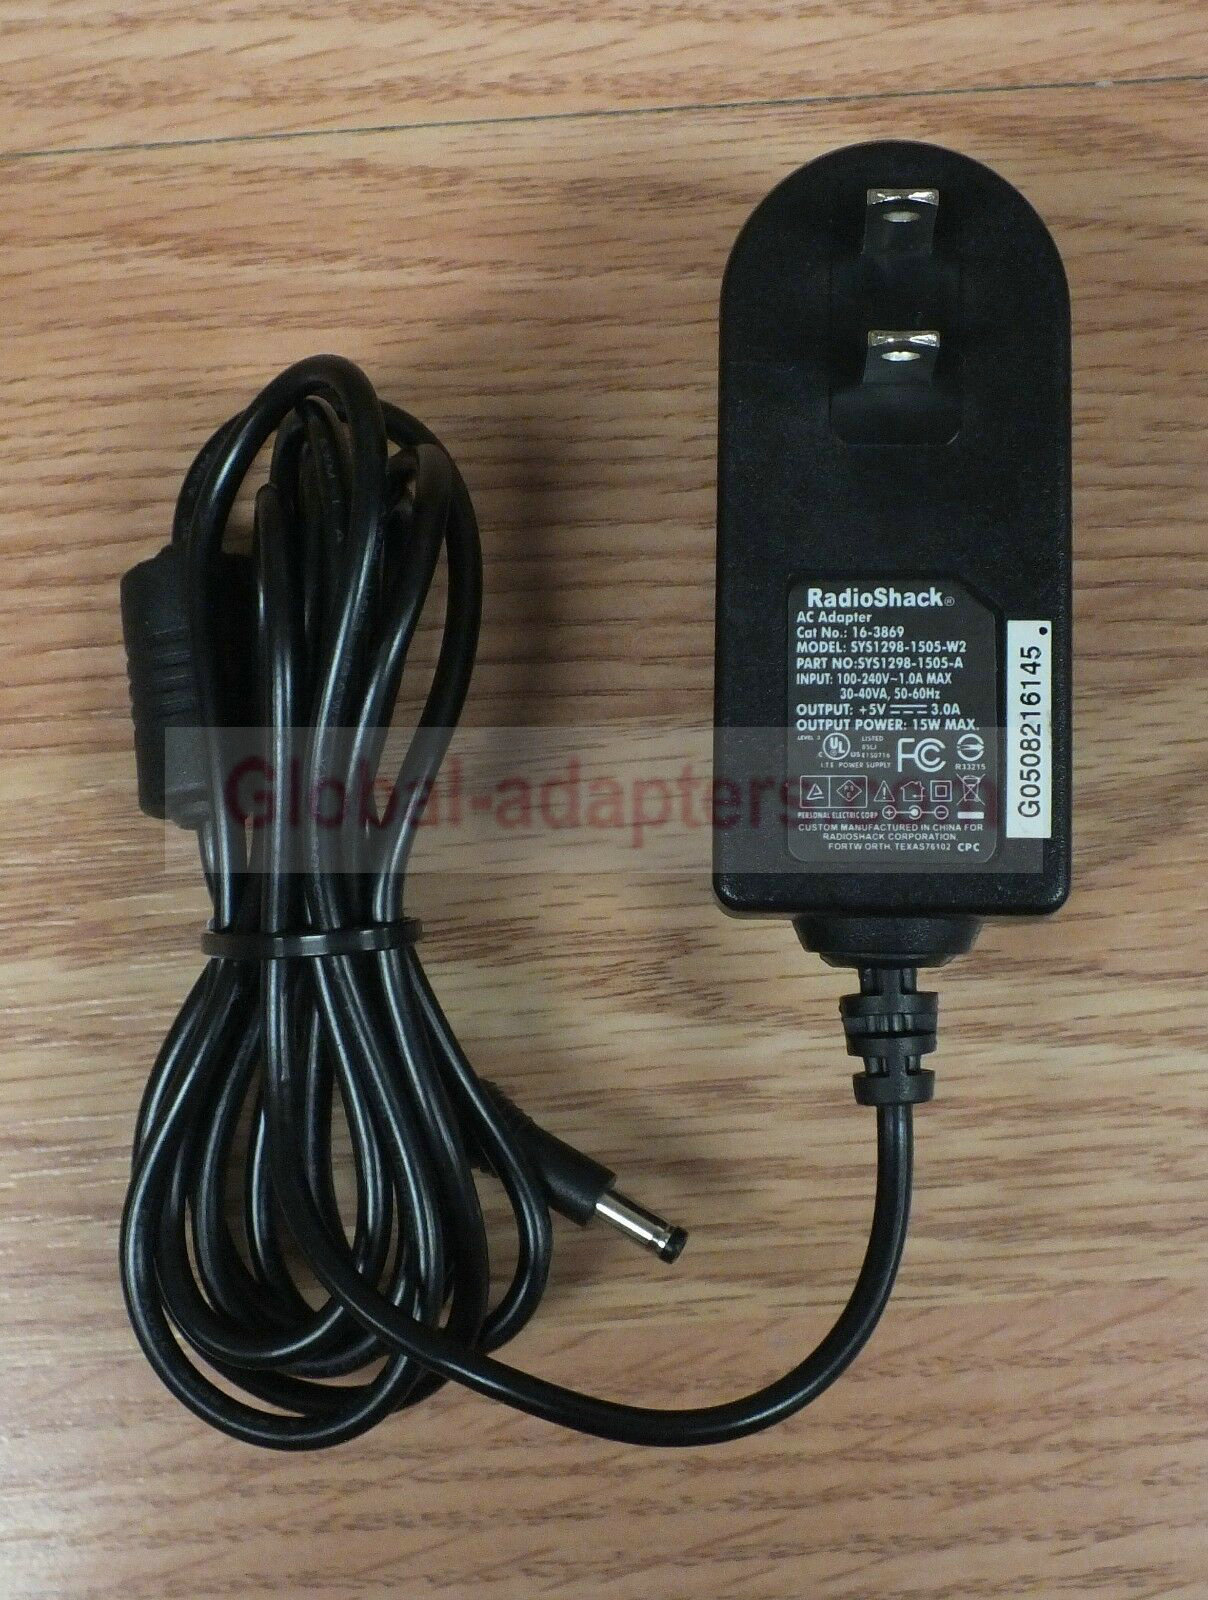 New 5V 3A Radio Shack SYS1298-1505-A 16-3869 Power Supply AC ADAPTER